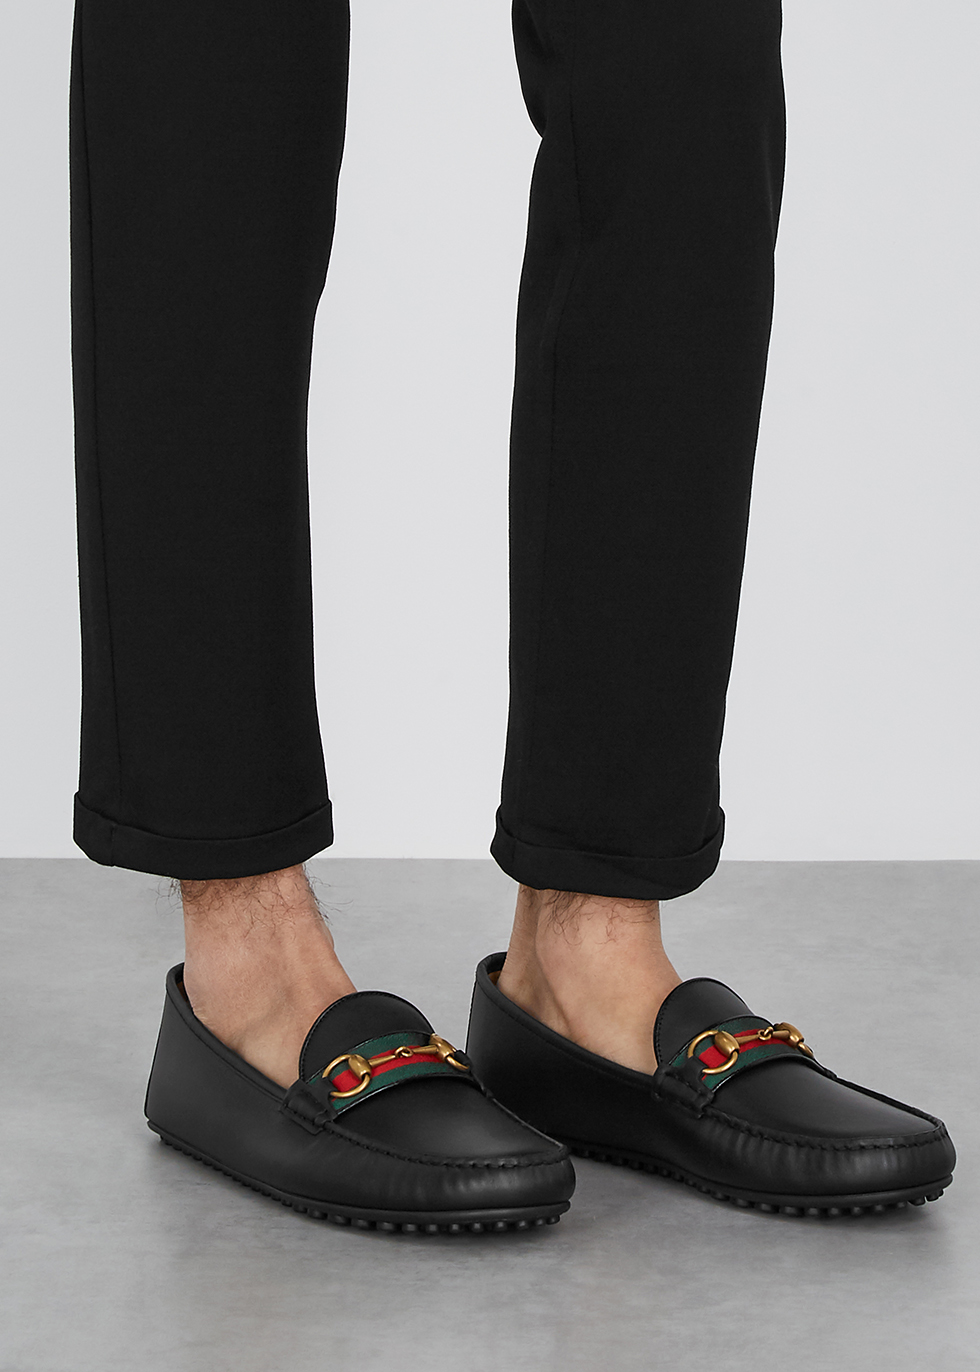 black driving loafers